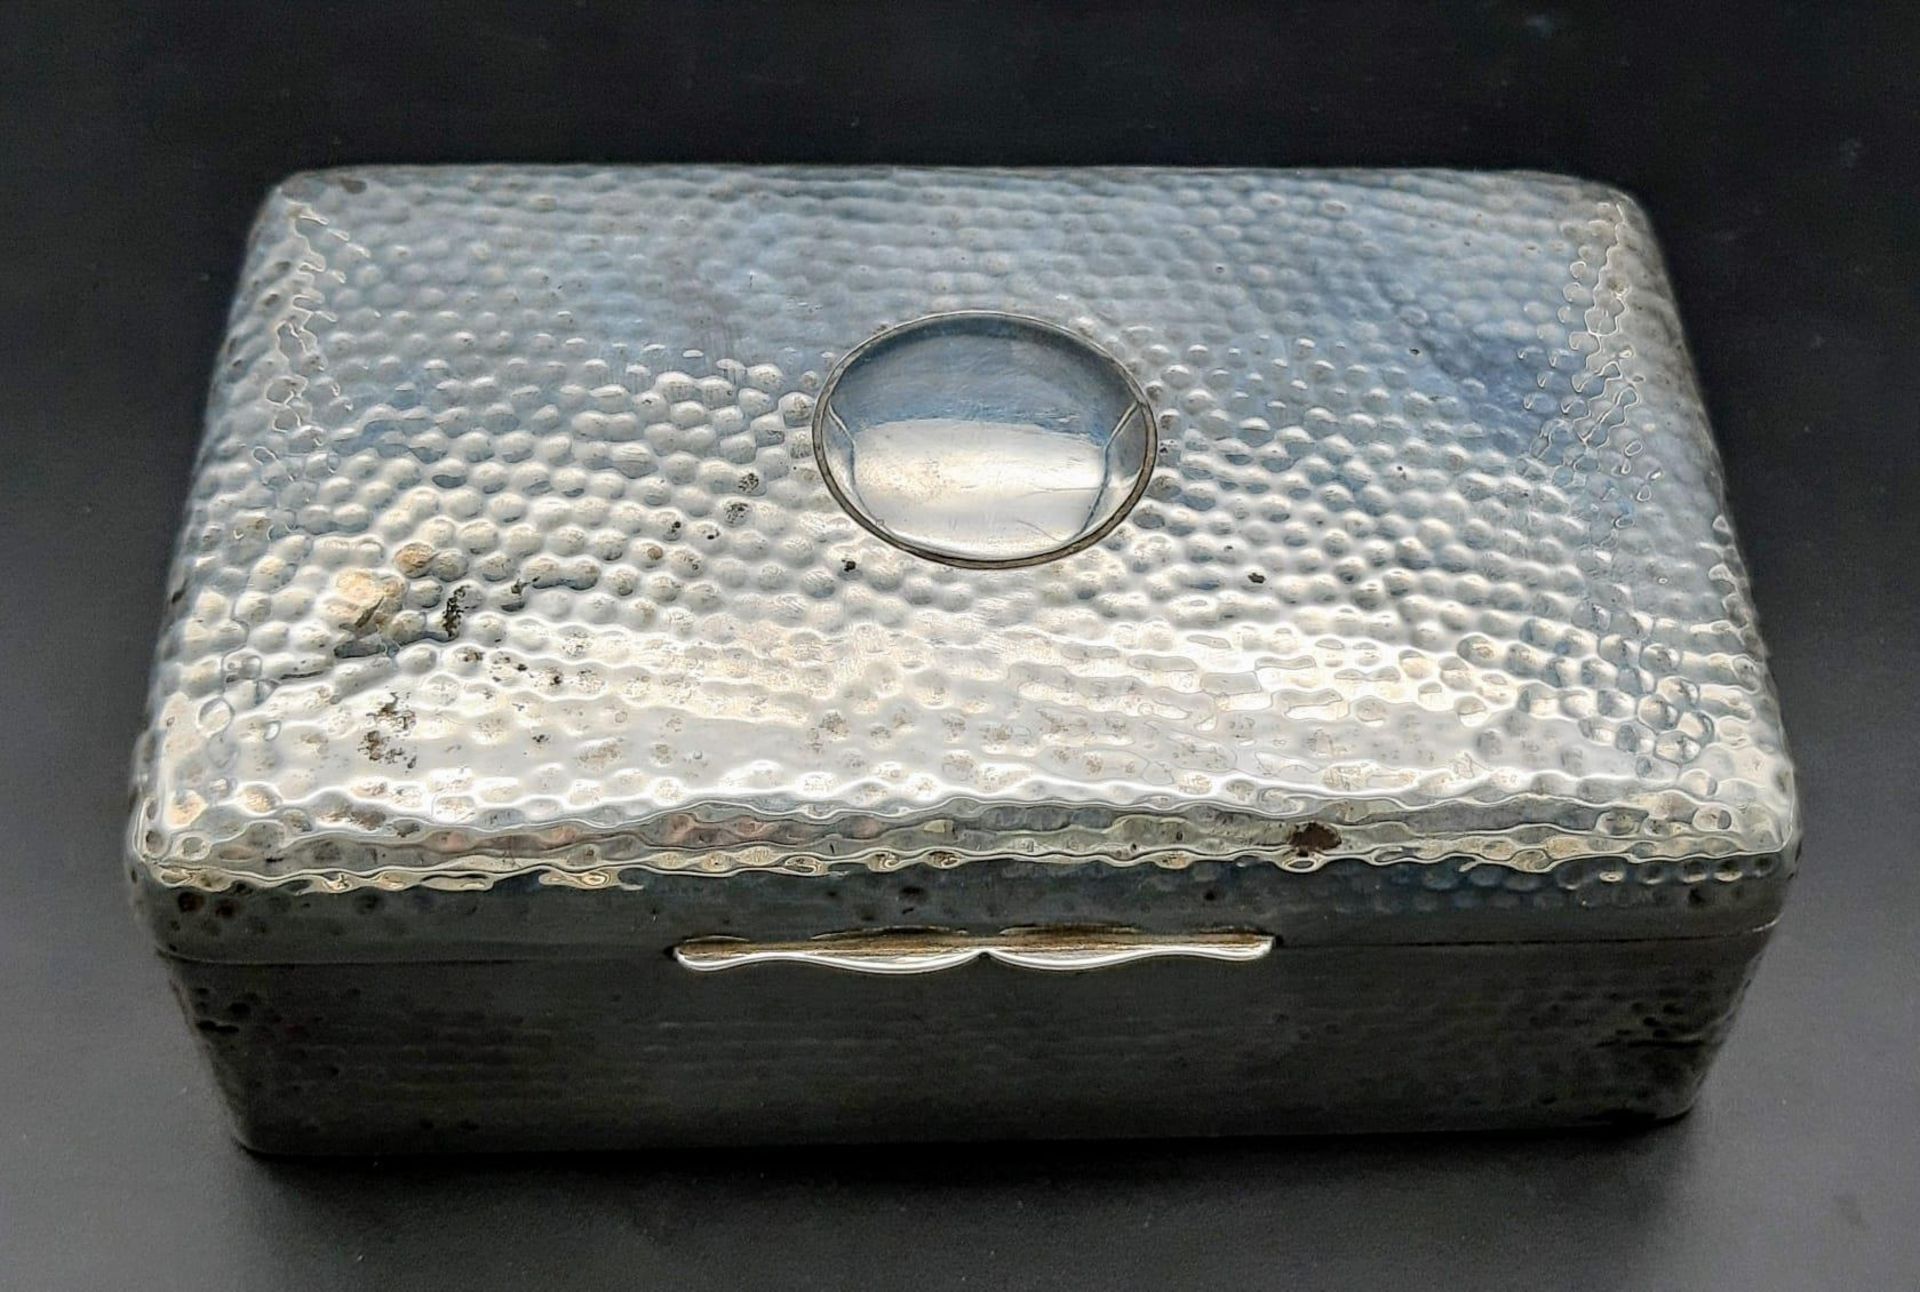 A Wonderful Antique Sterling Silver Cigarette, Cheroot Case. Dimpled silver exterior with a good - Image 7 of 8